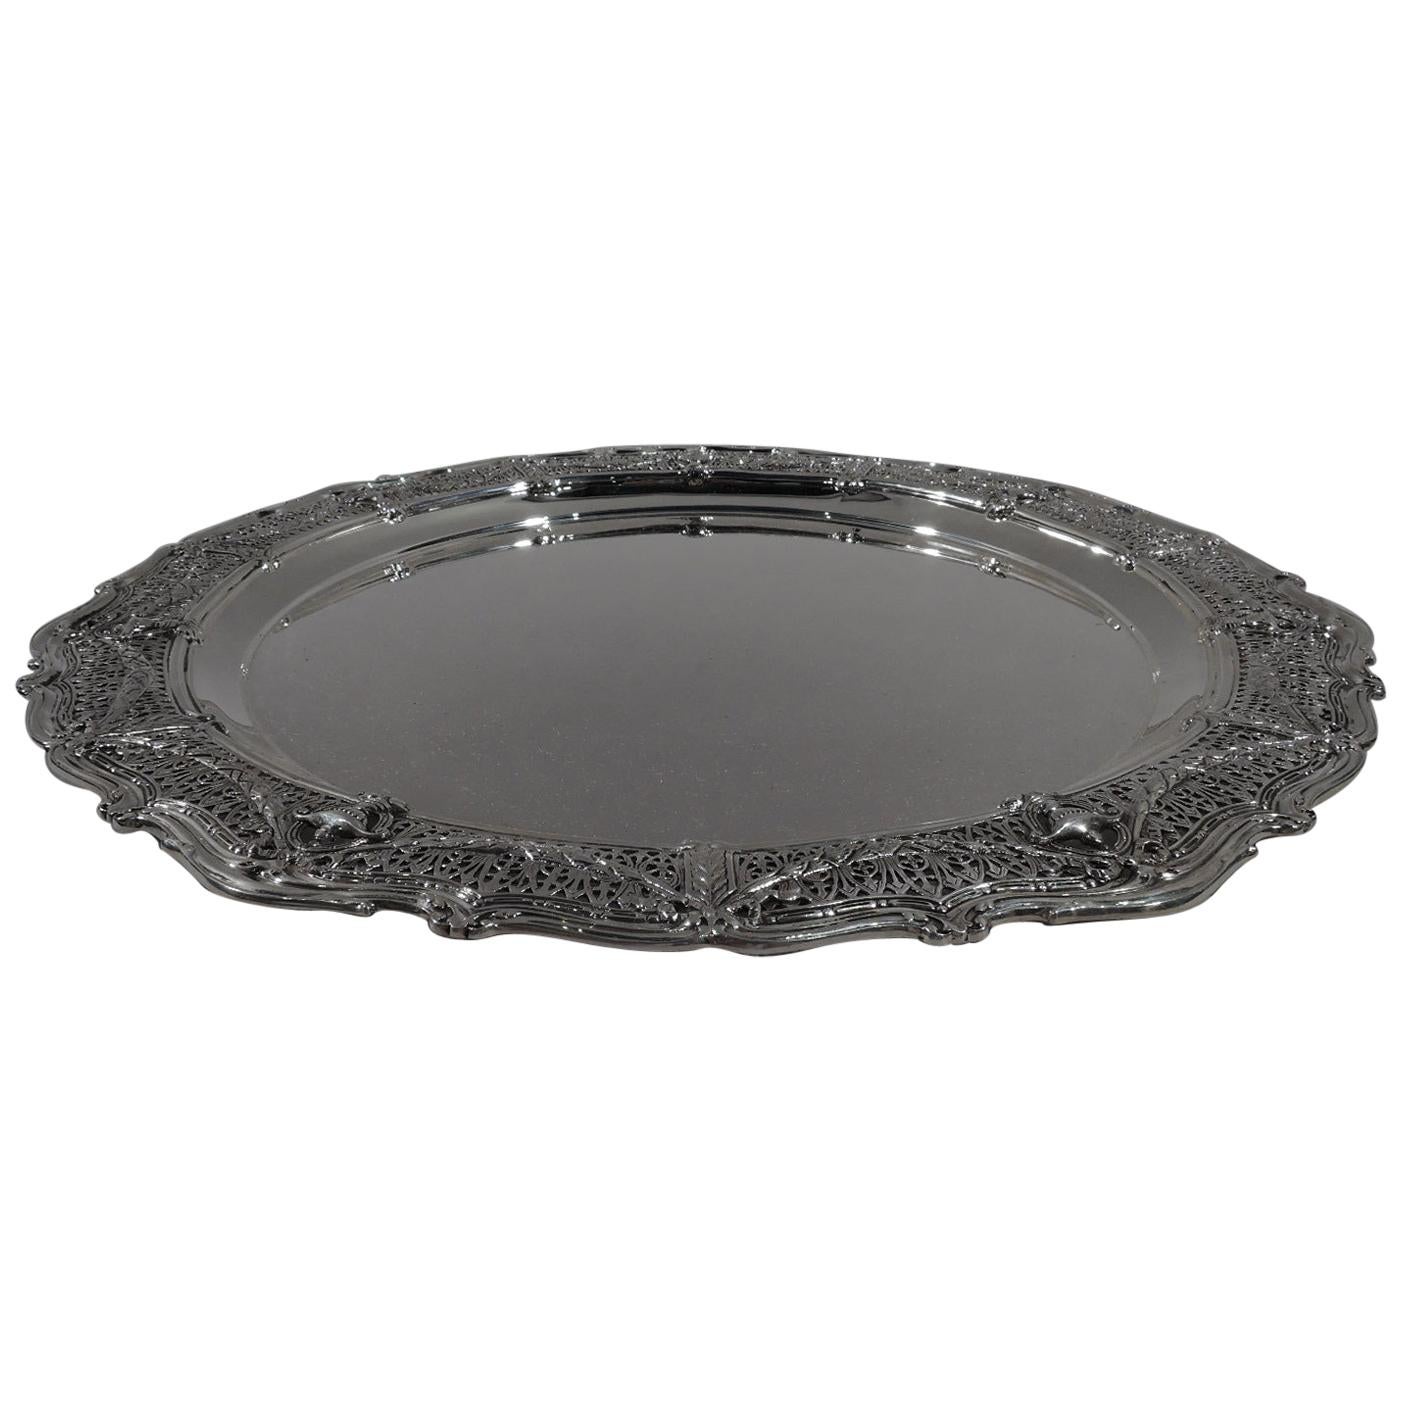 Antique Shreve Sterling Silver Tray in Desirable Adam Pattern